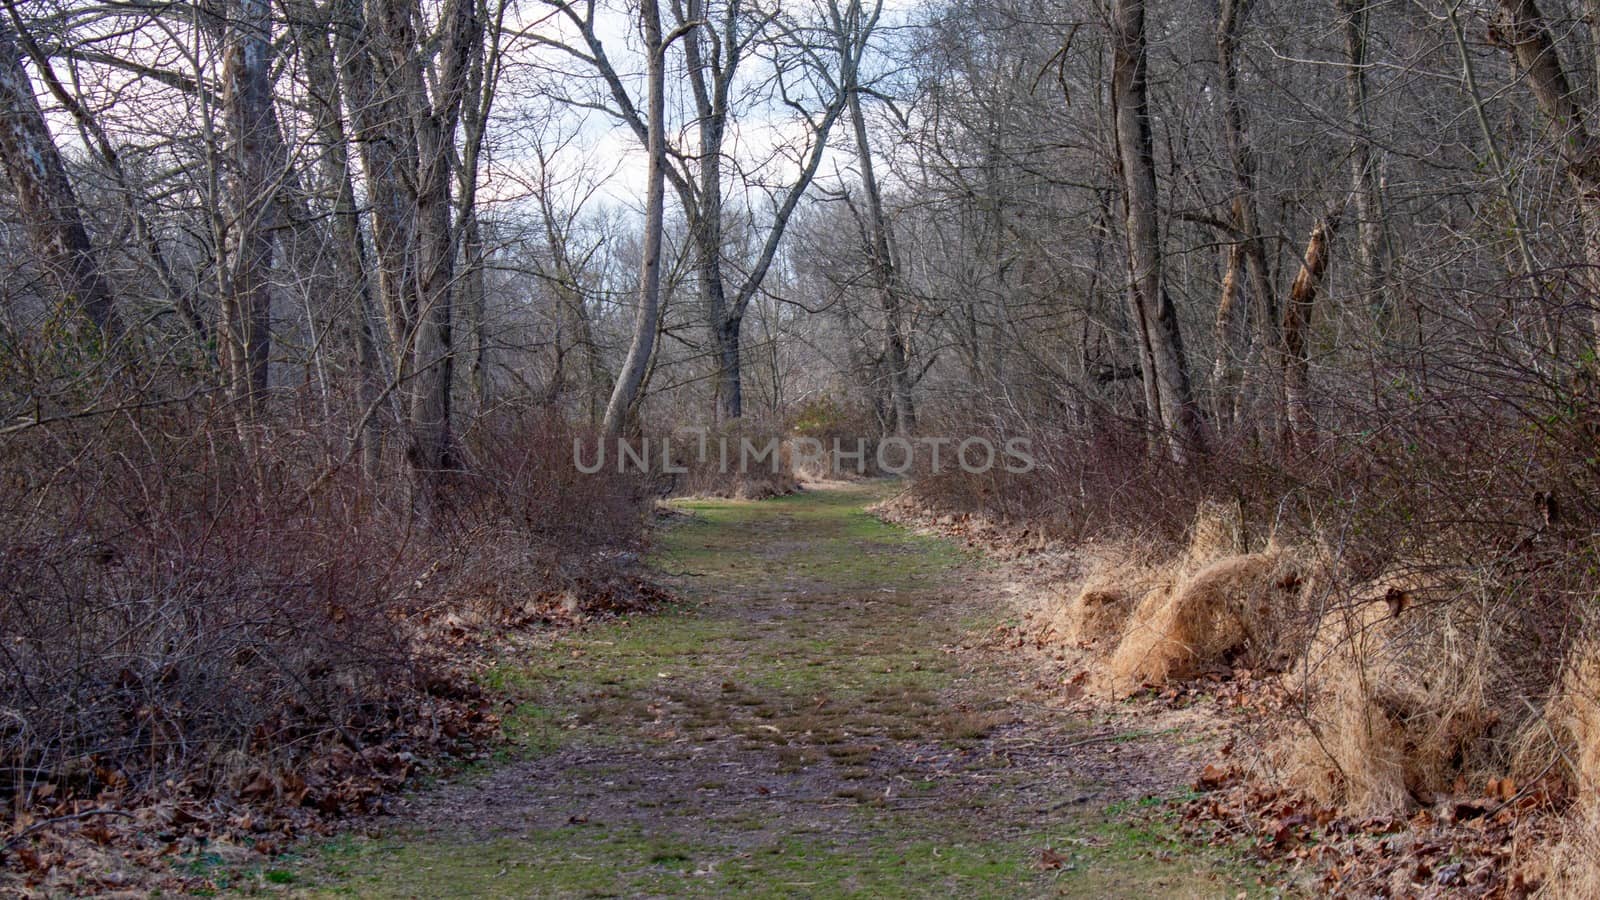 A Grassy Overgrown Path Covered in Foliage in a Dead Winter Forest